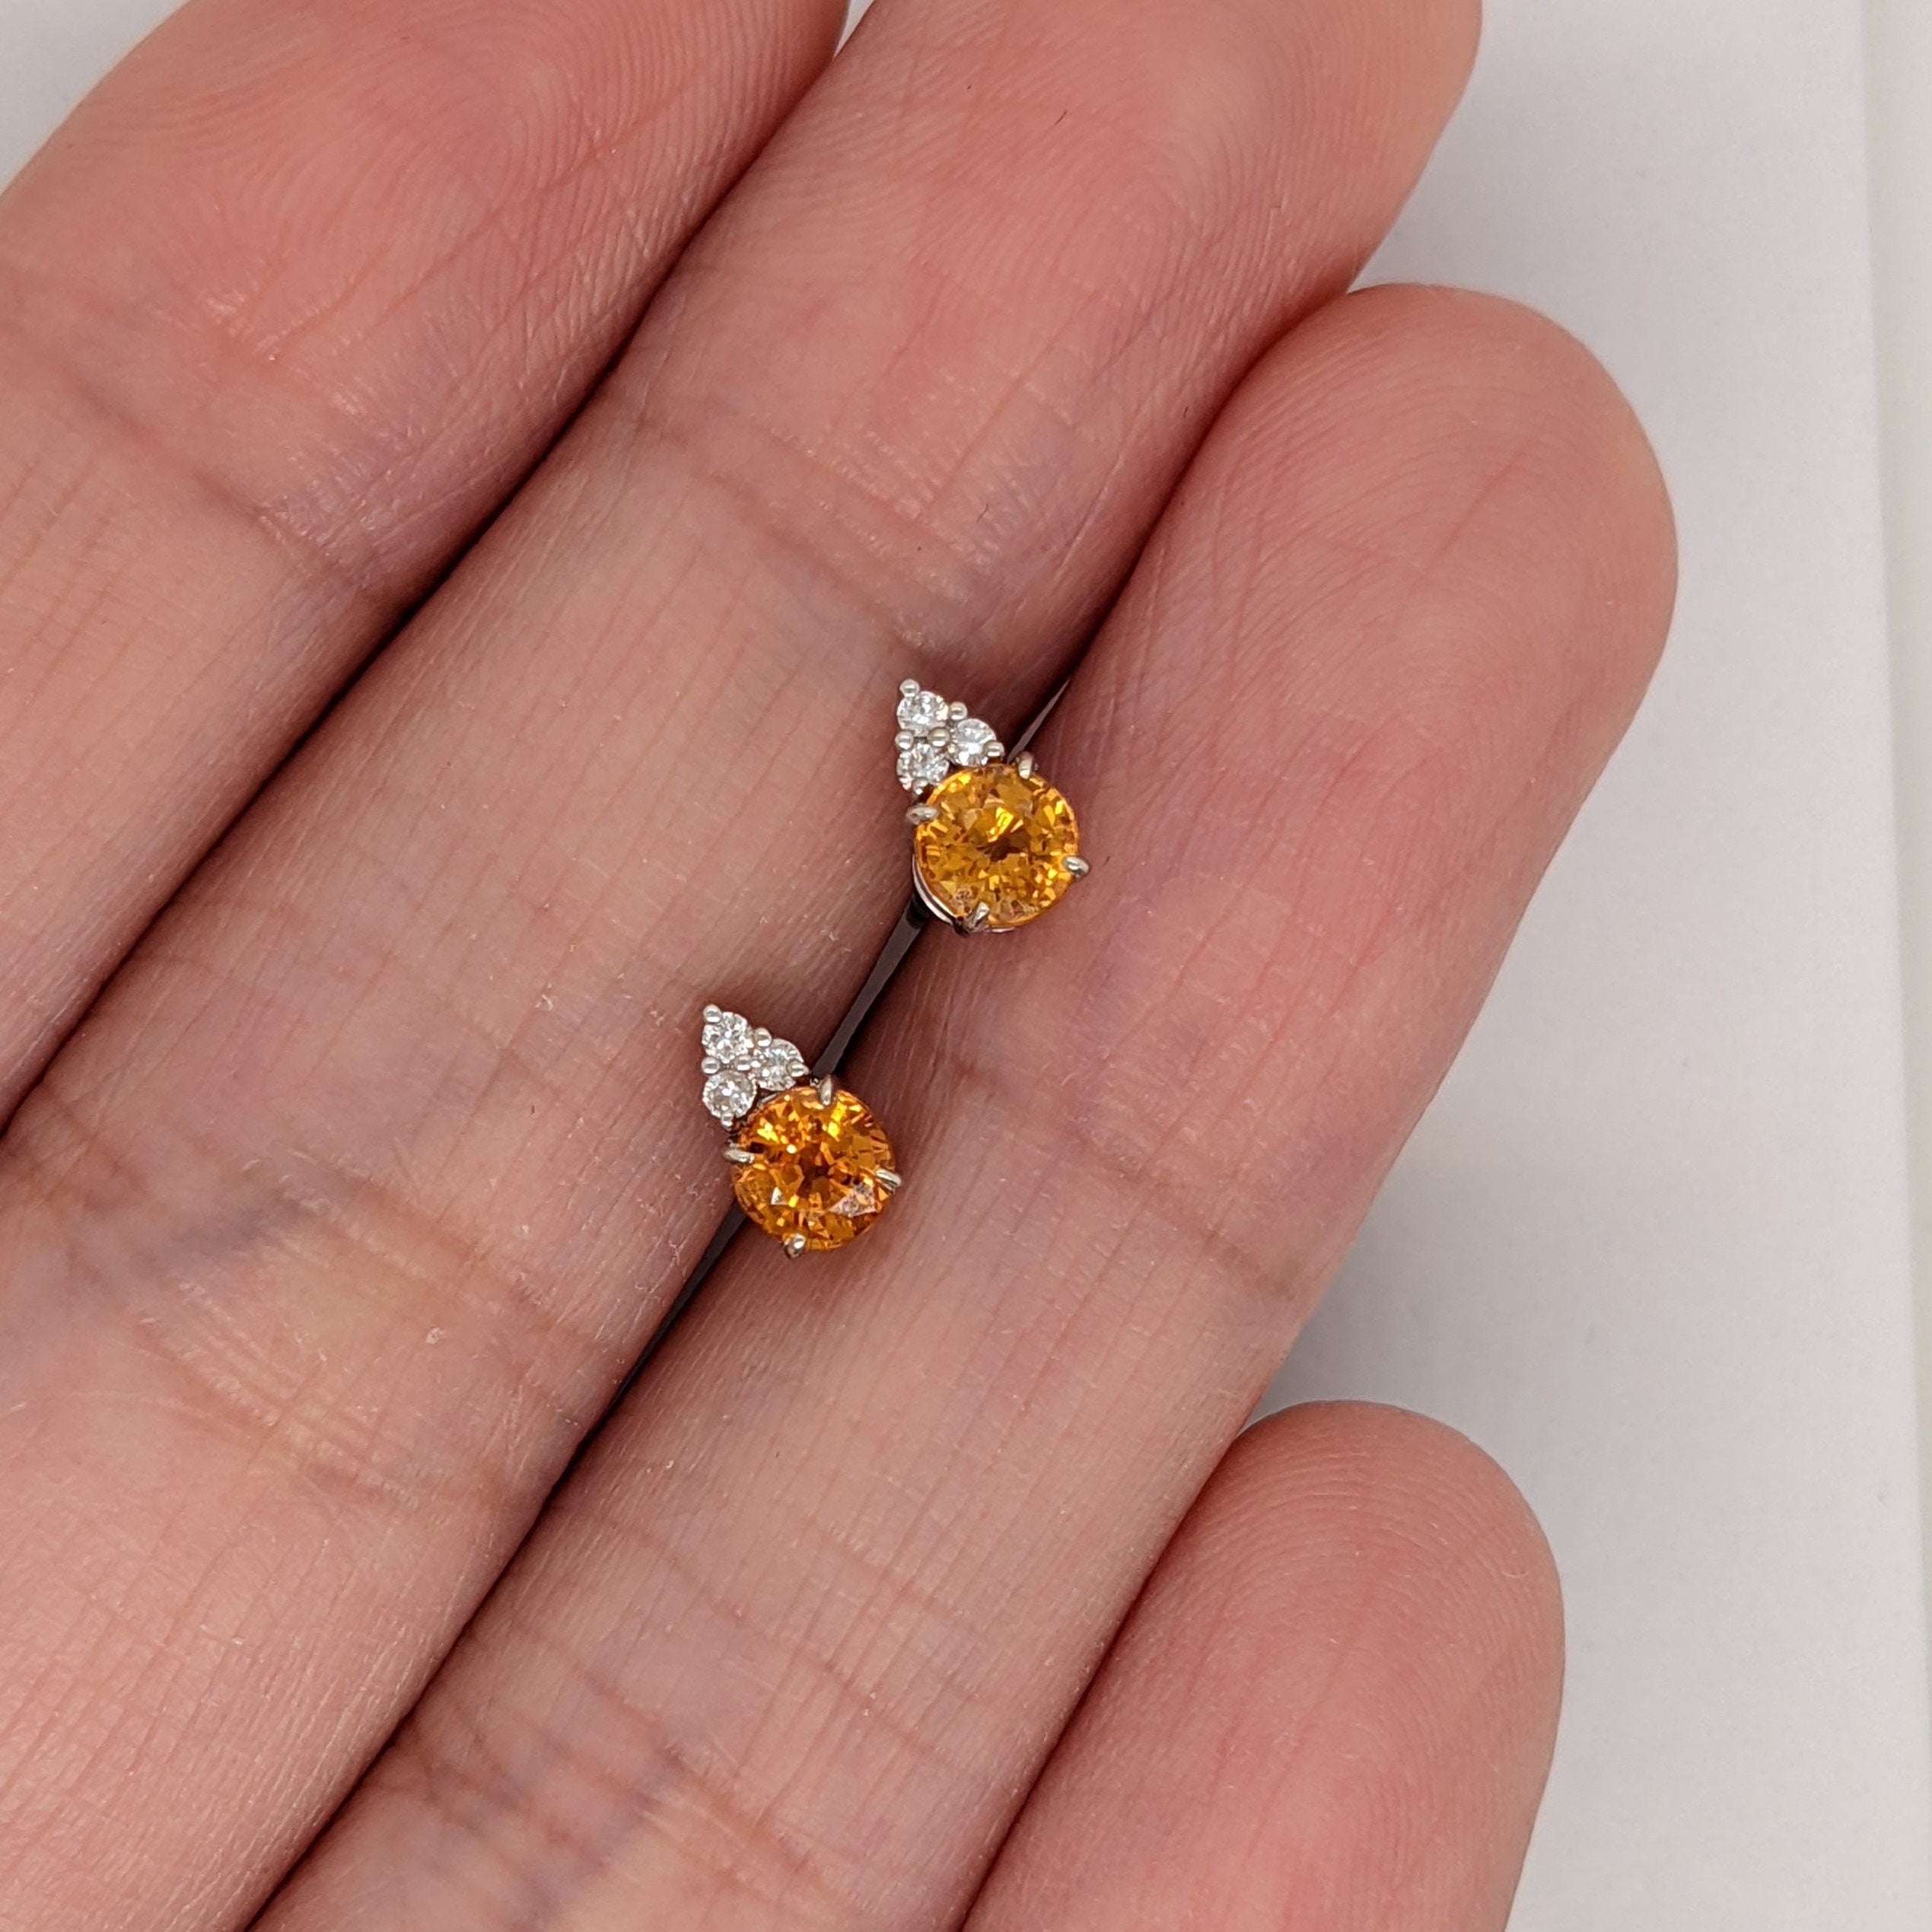 Orange Sapphire and Diamond Earring Studs in Solid 14K White Gold | Round 4mm | September Birthstone | Ready to Ship!